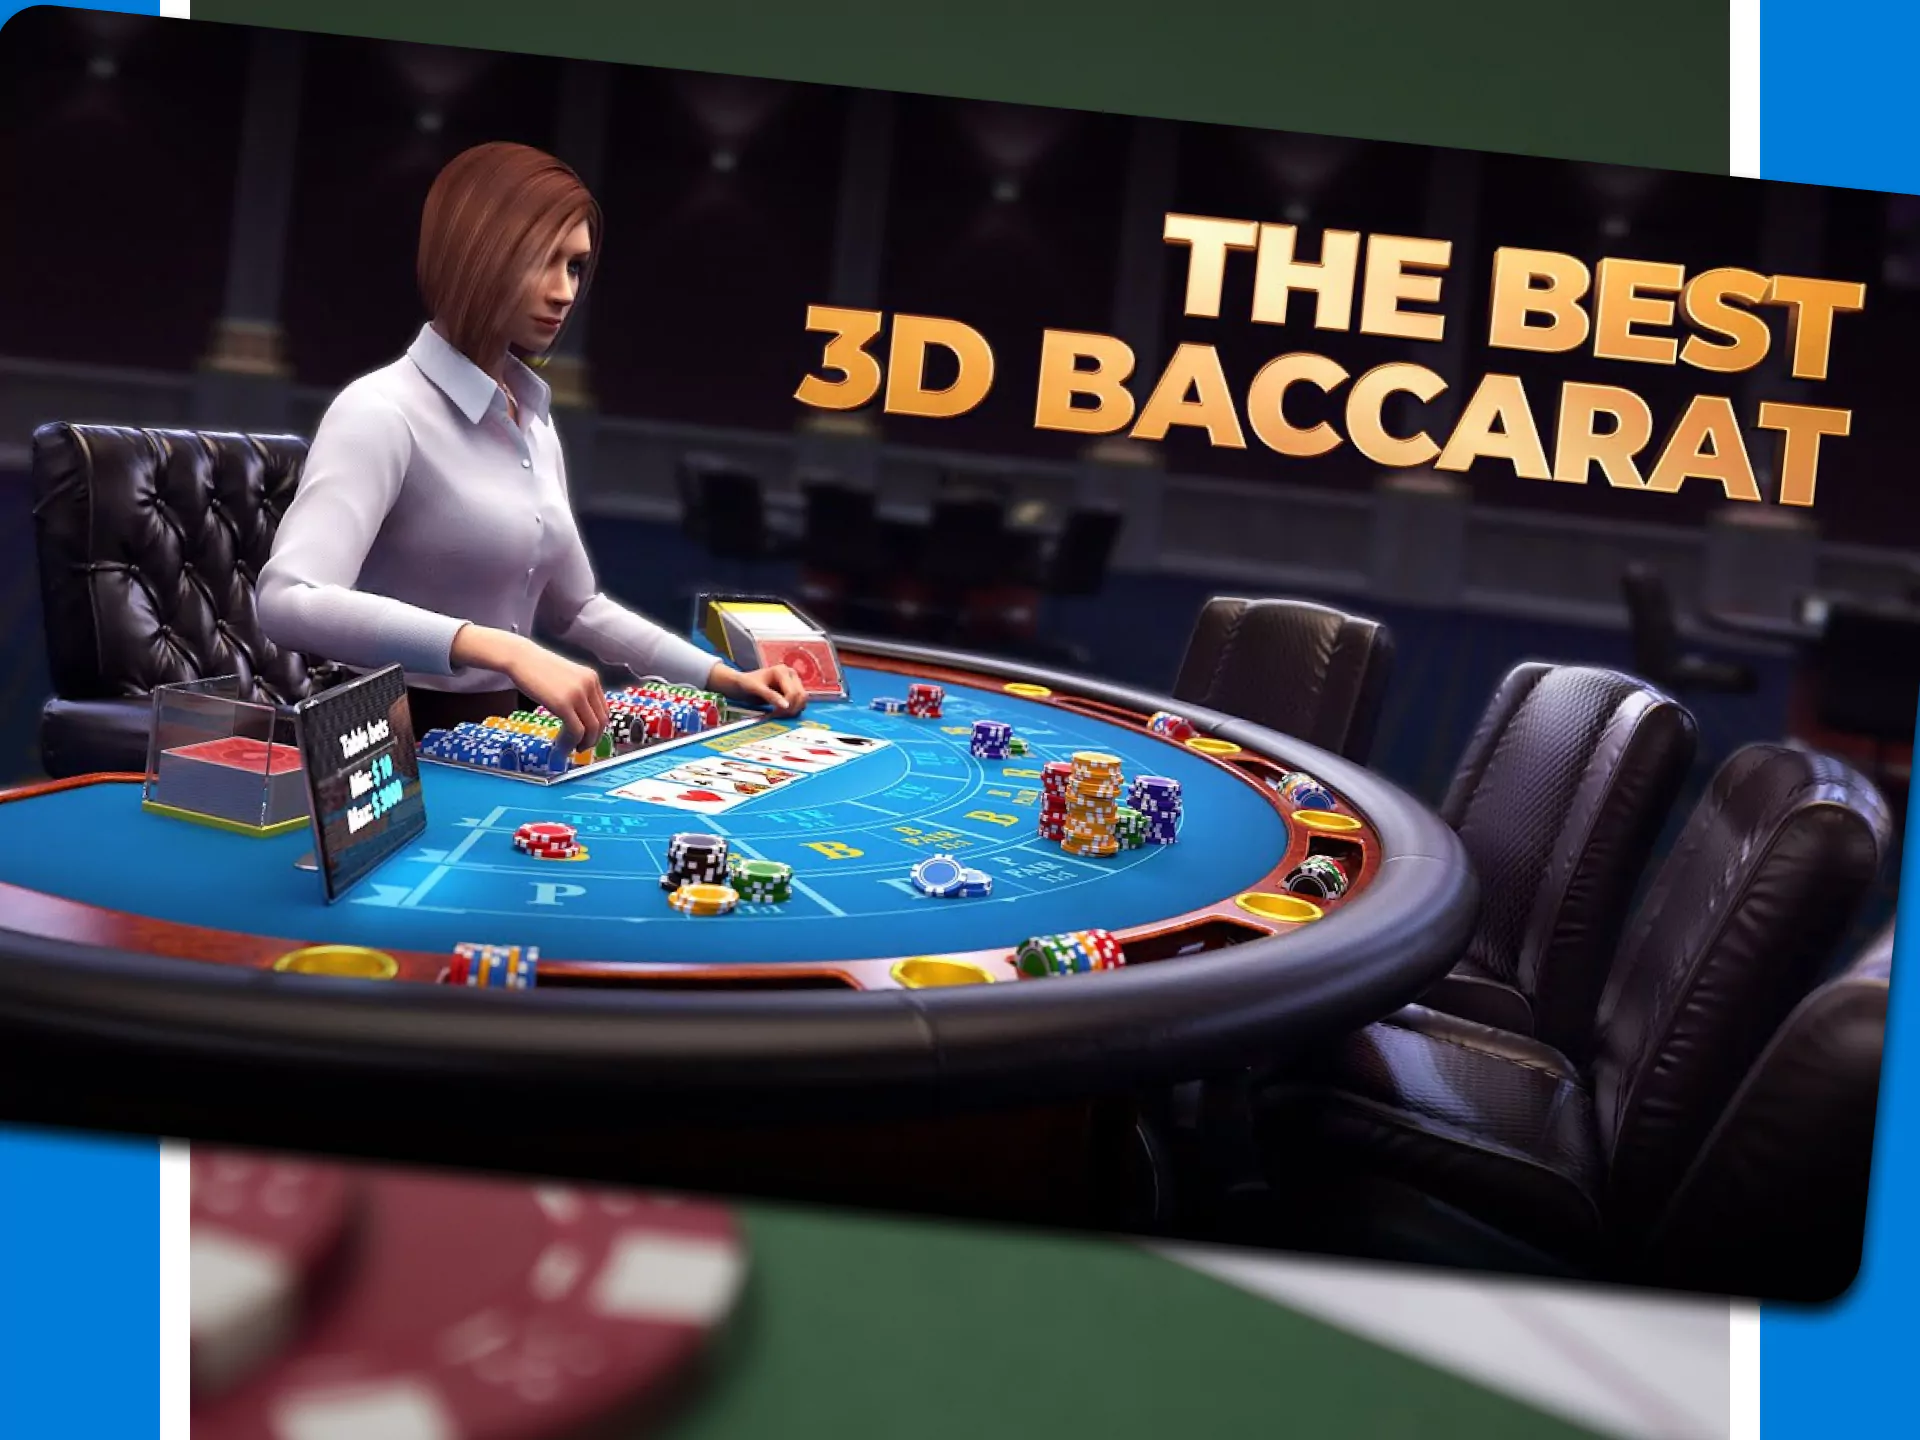 Choose the best baccarat game at Crickex.